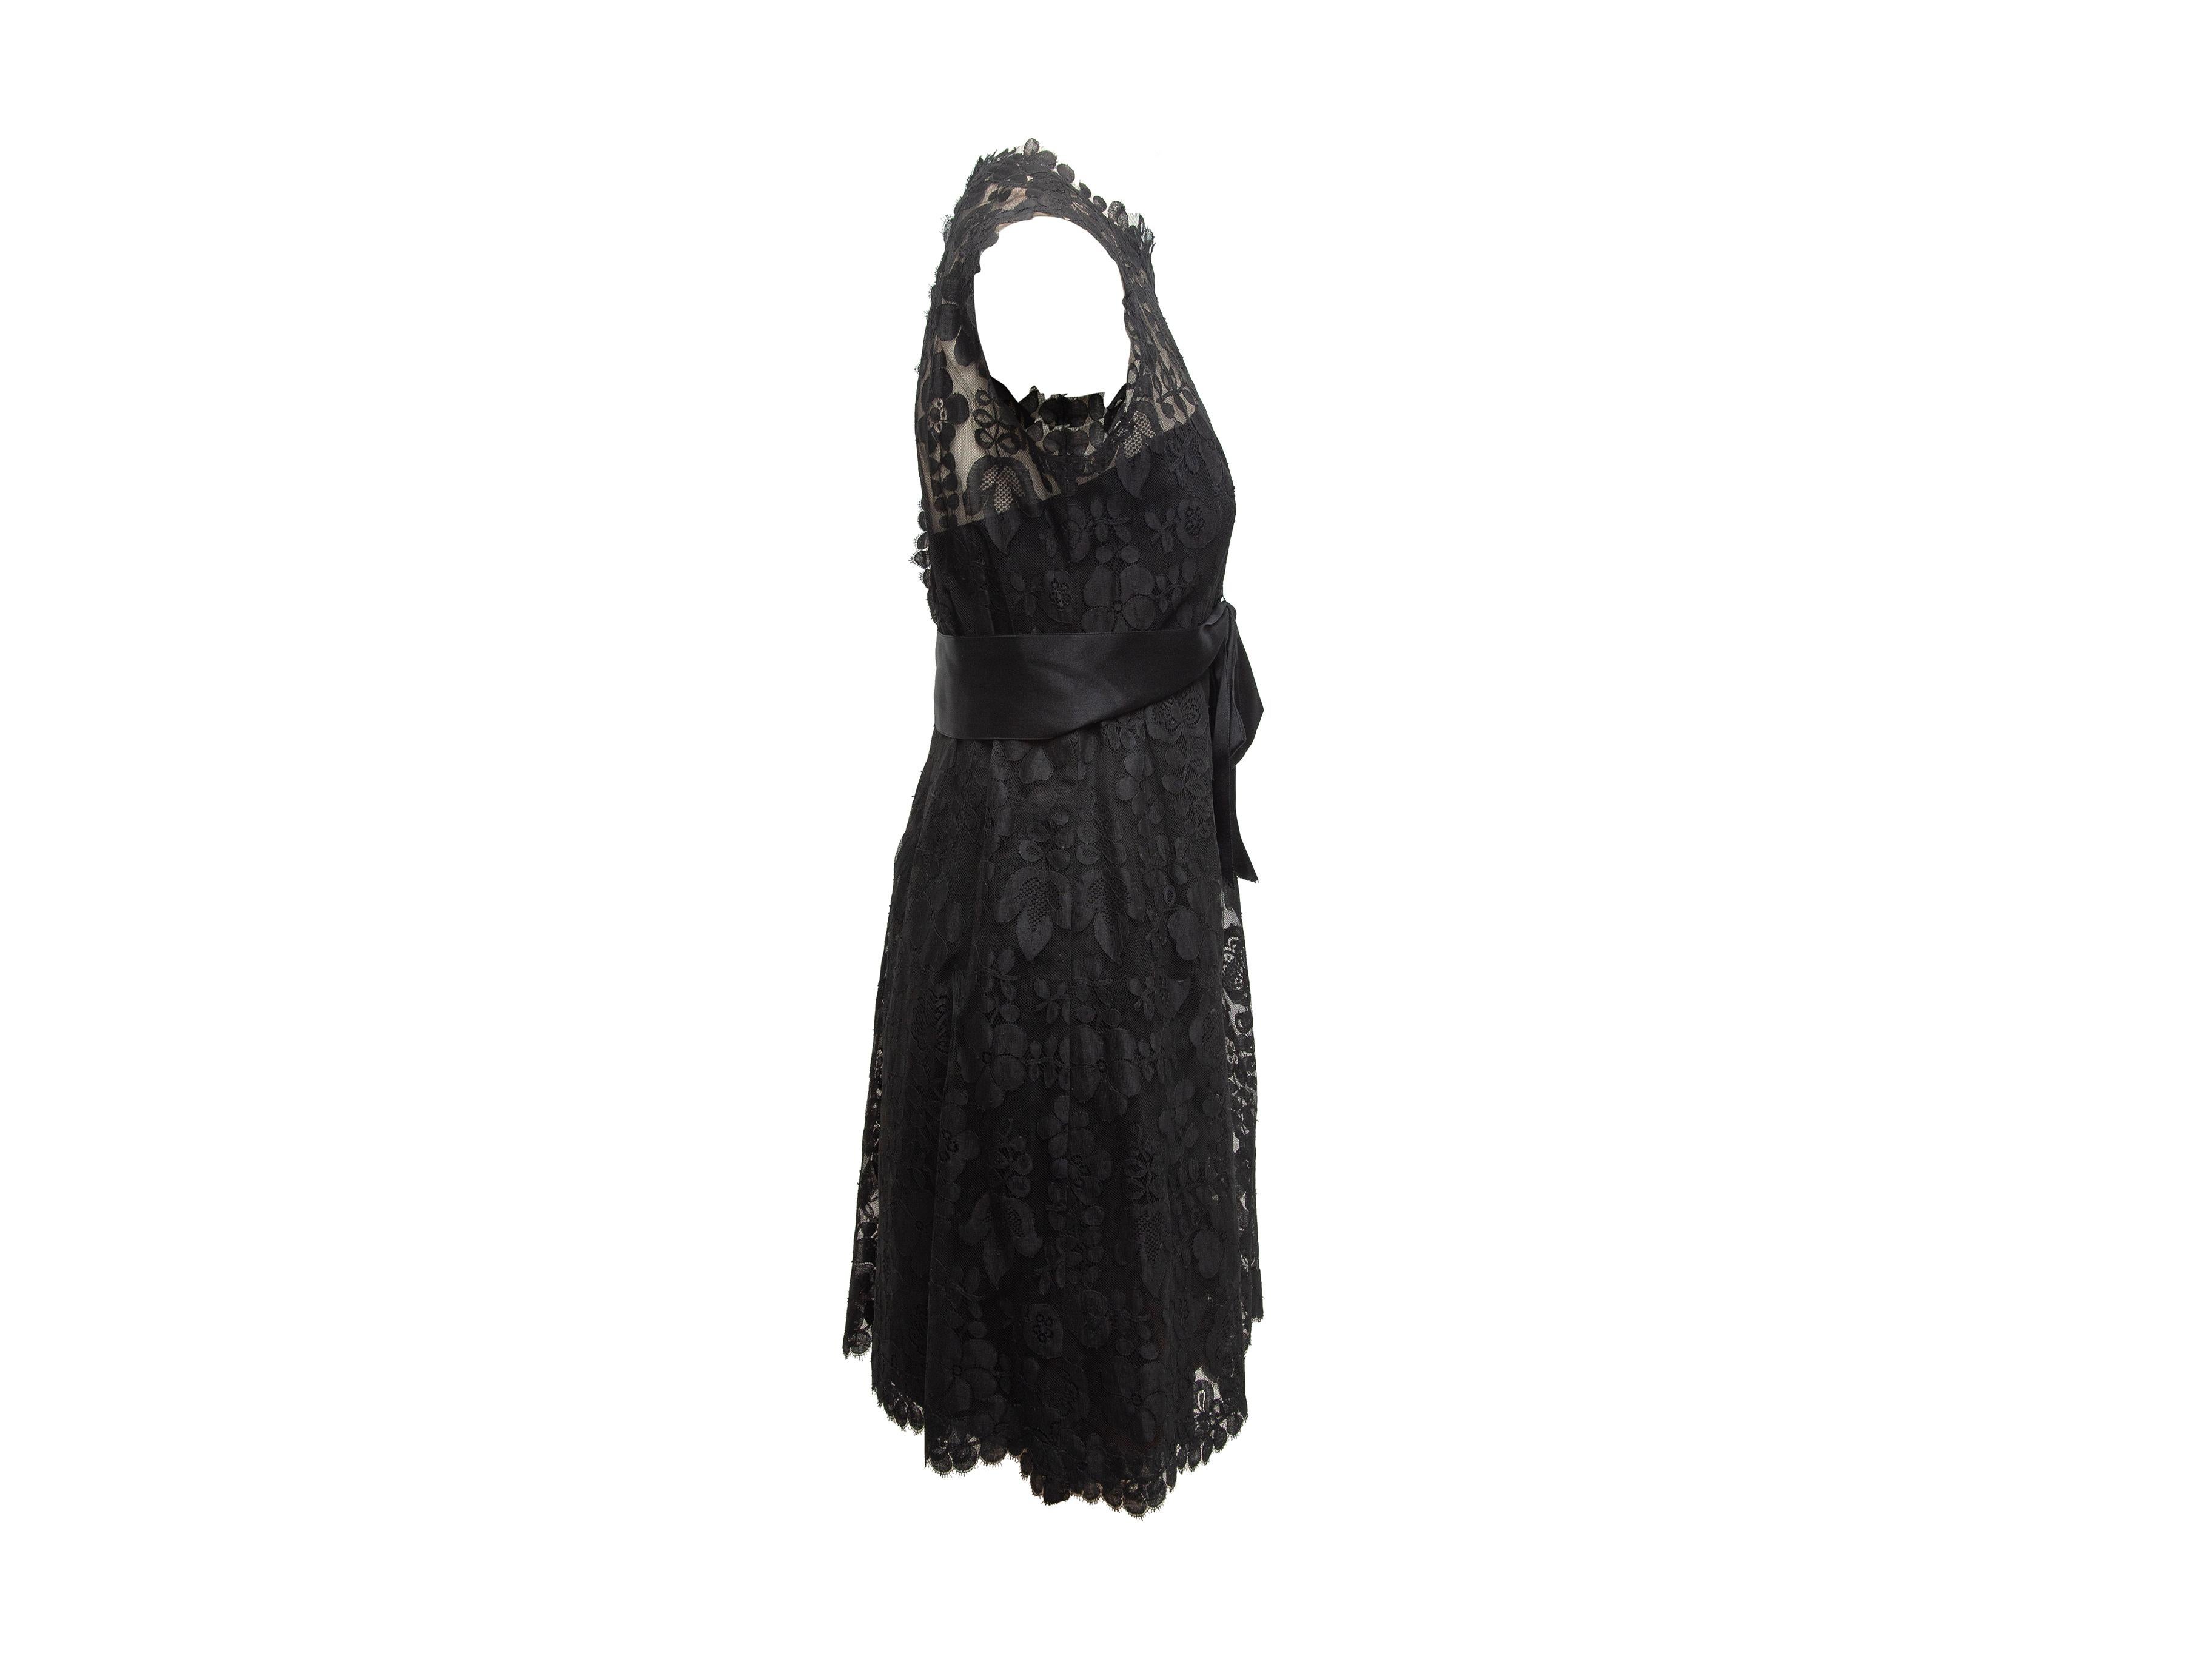 Product details: Vintage black lace sleeveless dress by Adele Simpson. Crew neck. Partially sheer bodice. Satin bow at waist. 32